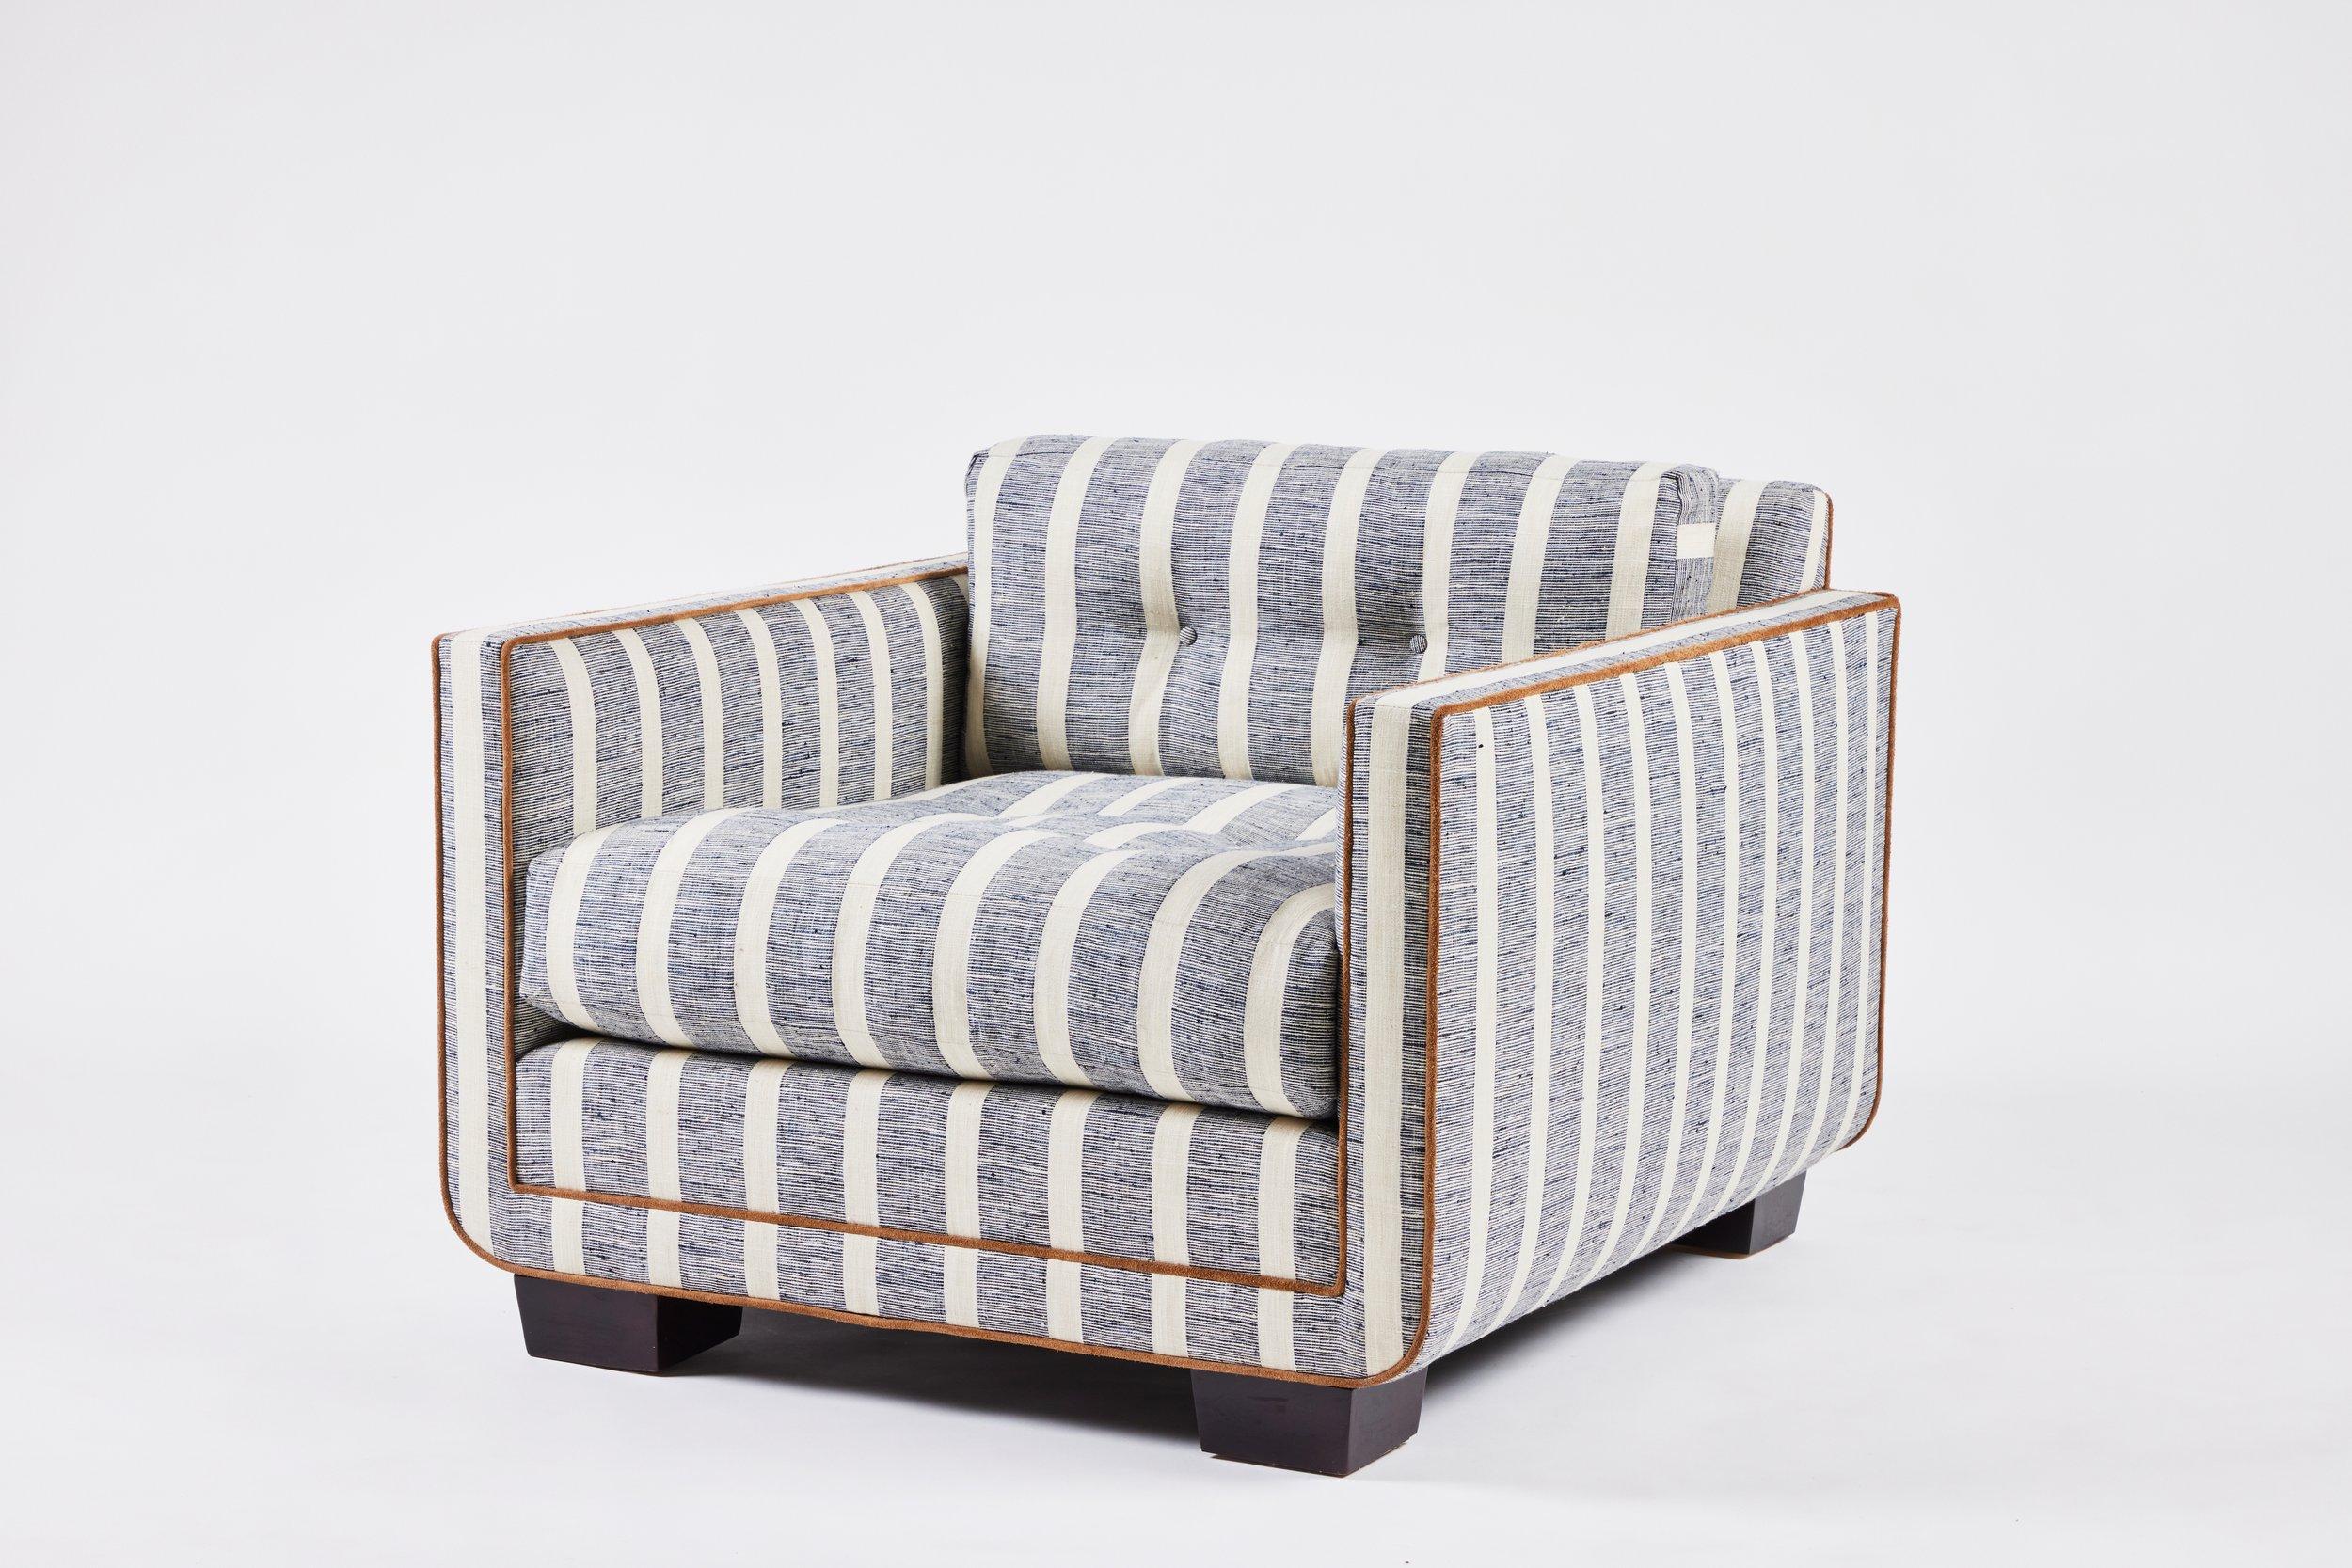 American Modern Streamlined Tufted Chair with Curved Base Detail by Martin & Brockett For Sale